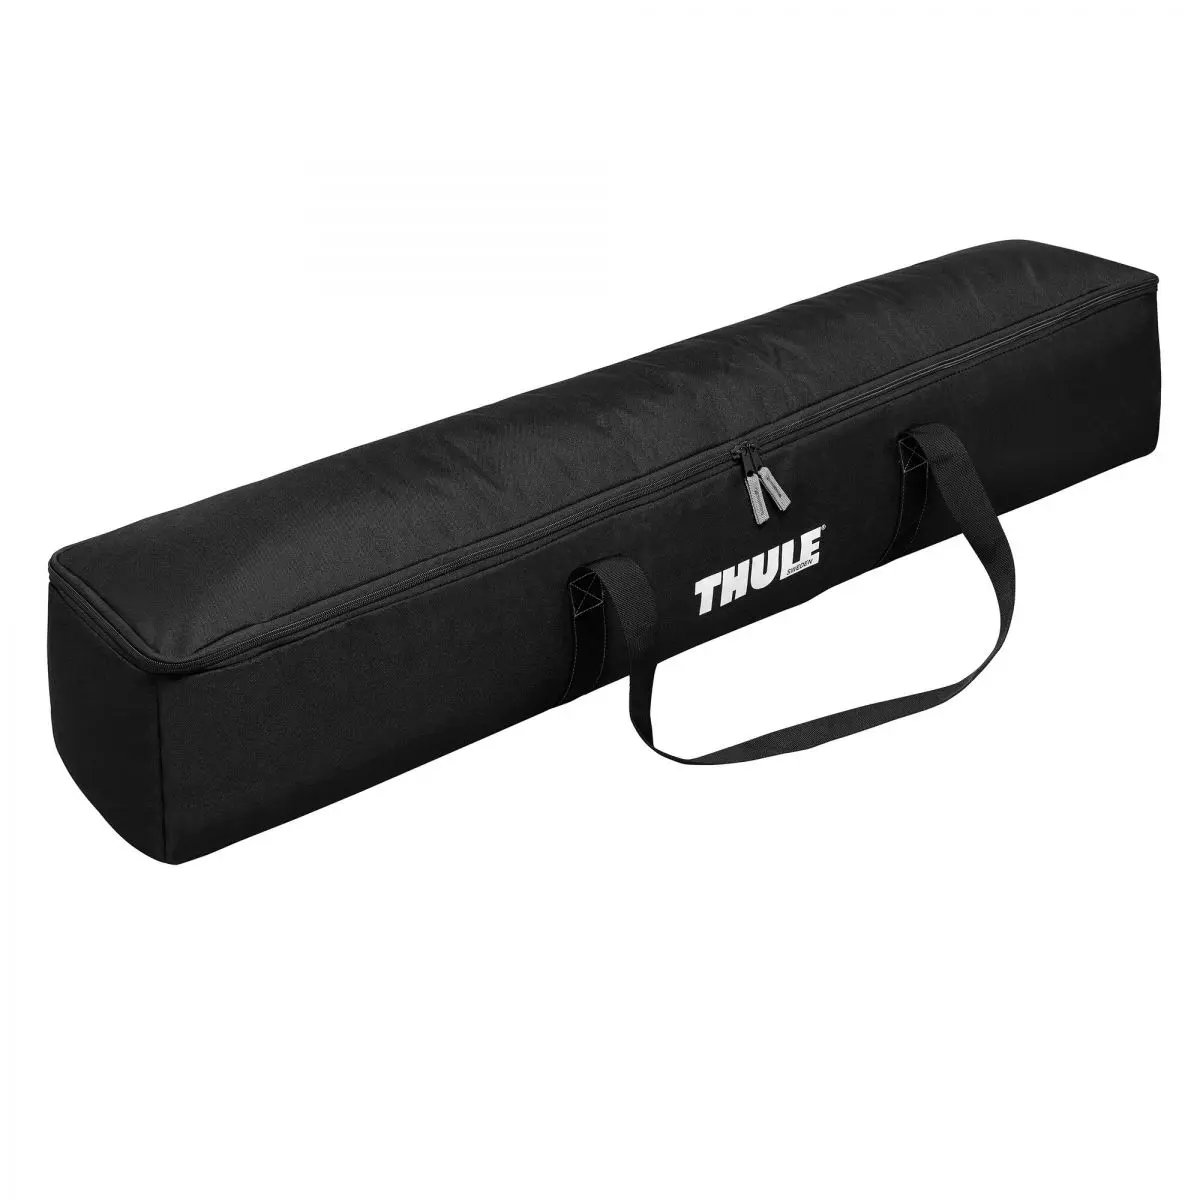 Thule Panorama fr TO 8000, Lnge 6 m, Hhe L